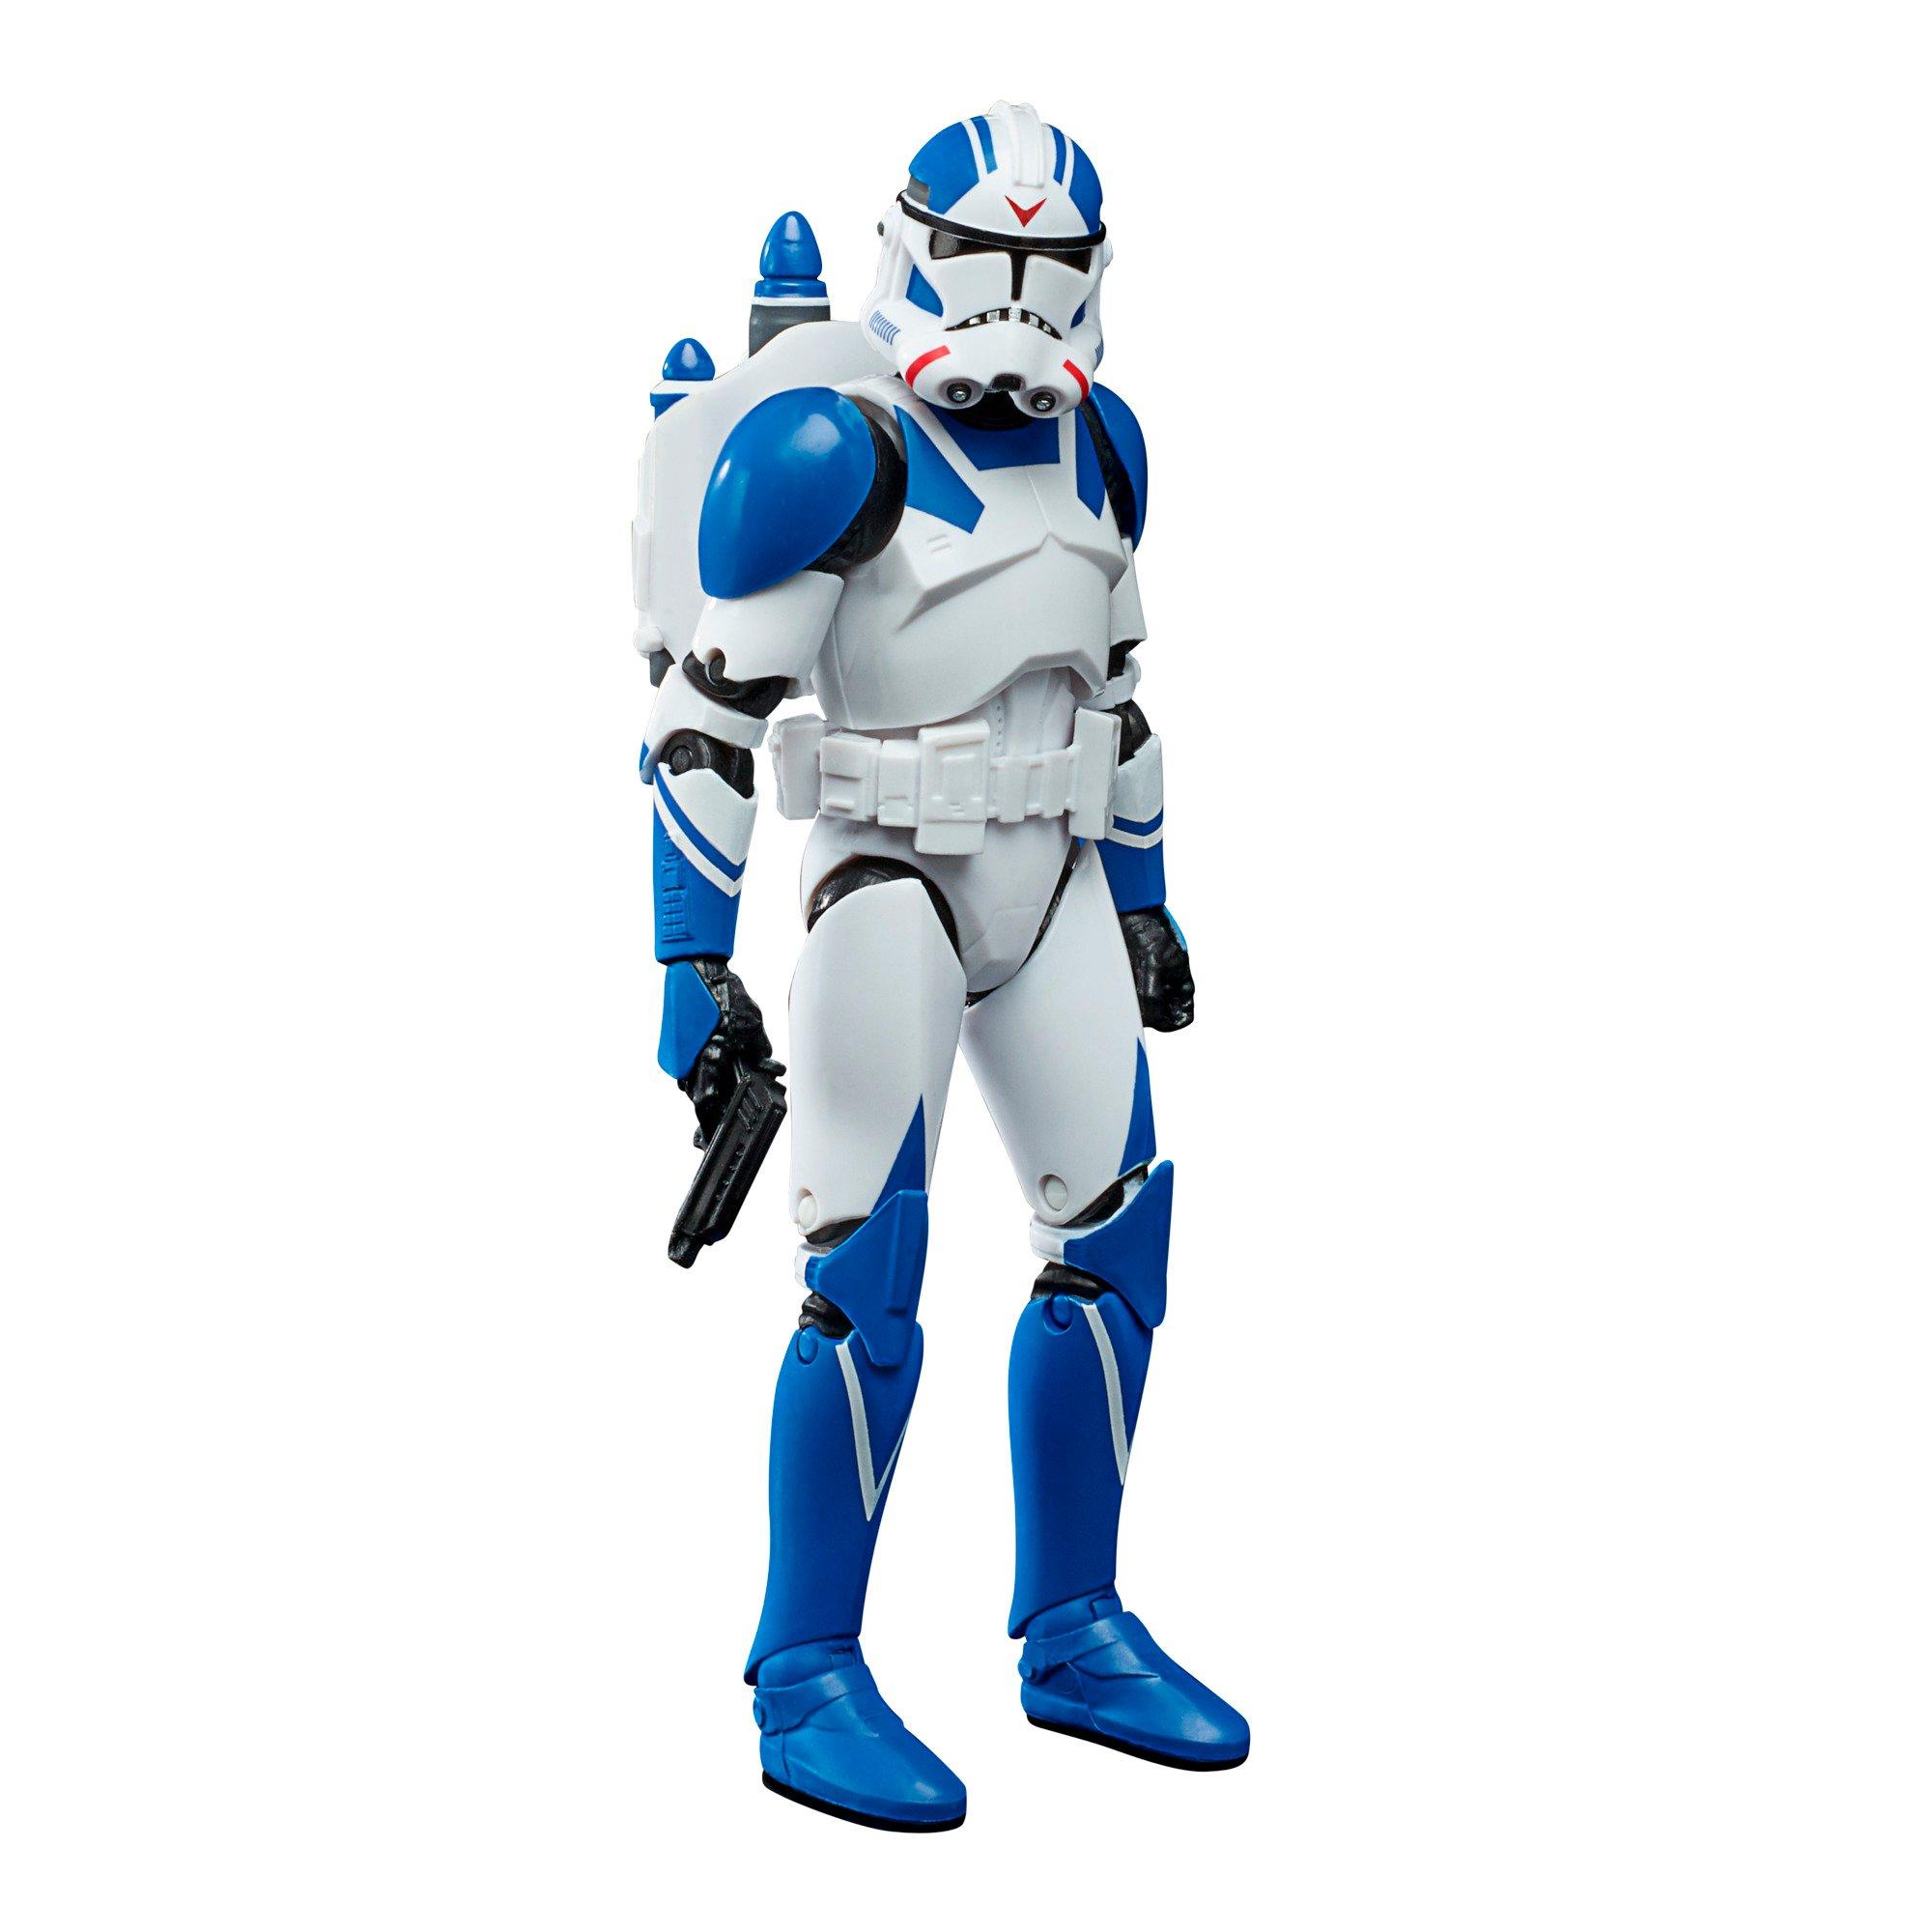 Hasbro Star Wars Clone Wars Animated Action Figure for sale online